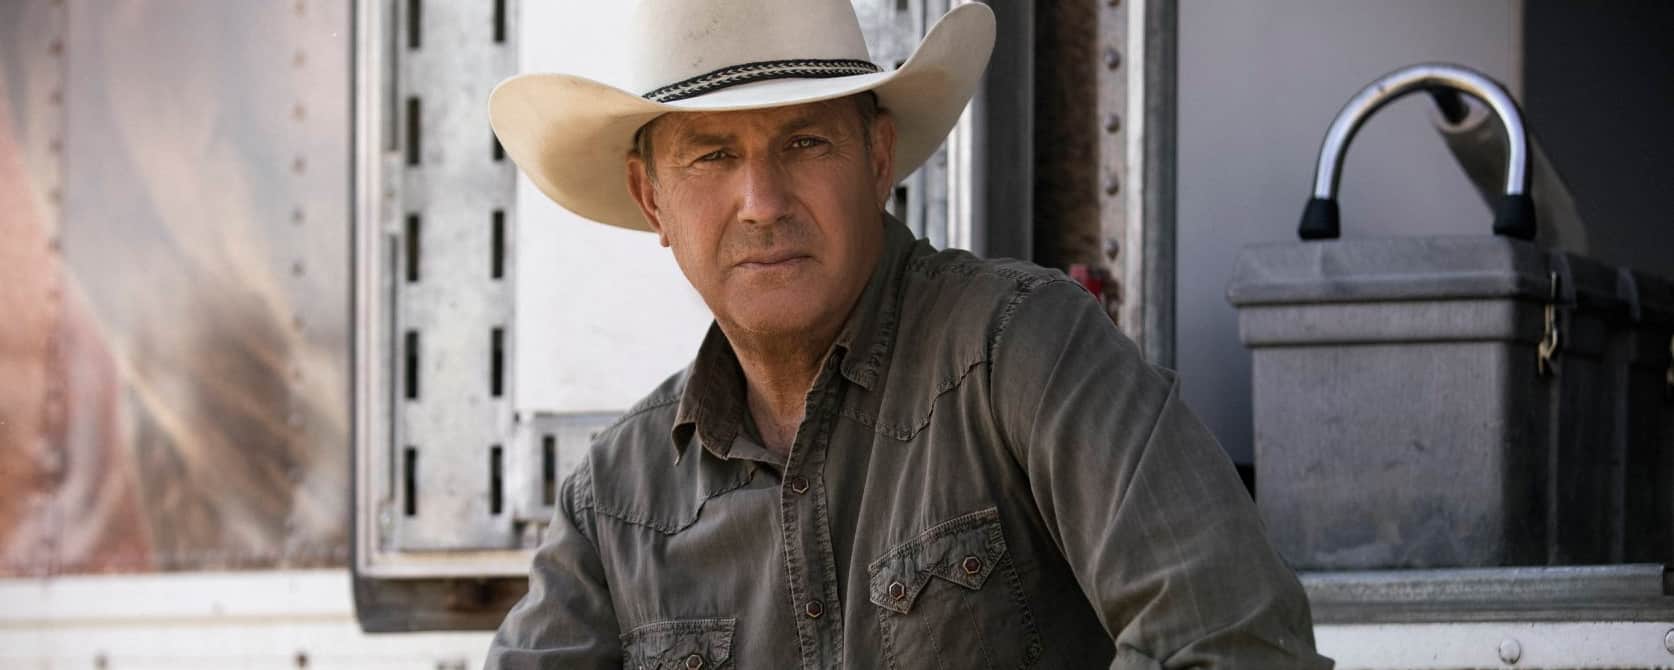 Kevin Costner On Screenwriting and Songwriting The Music Of ‘Yellowstone’